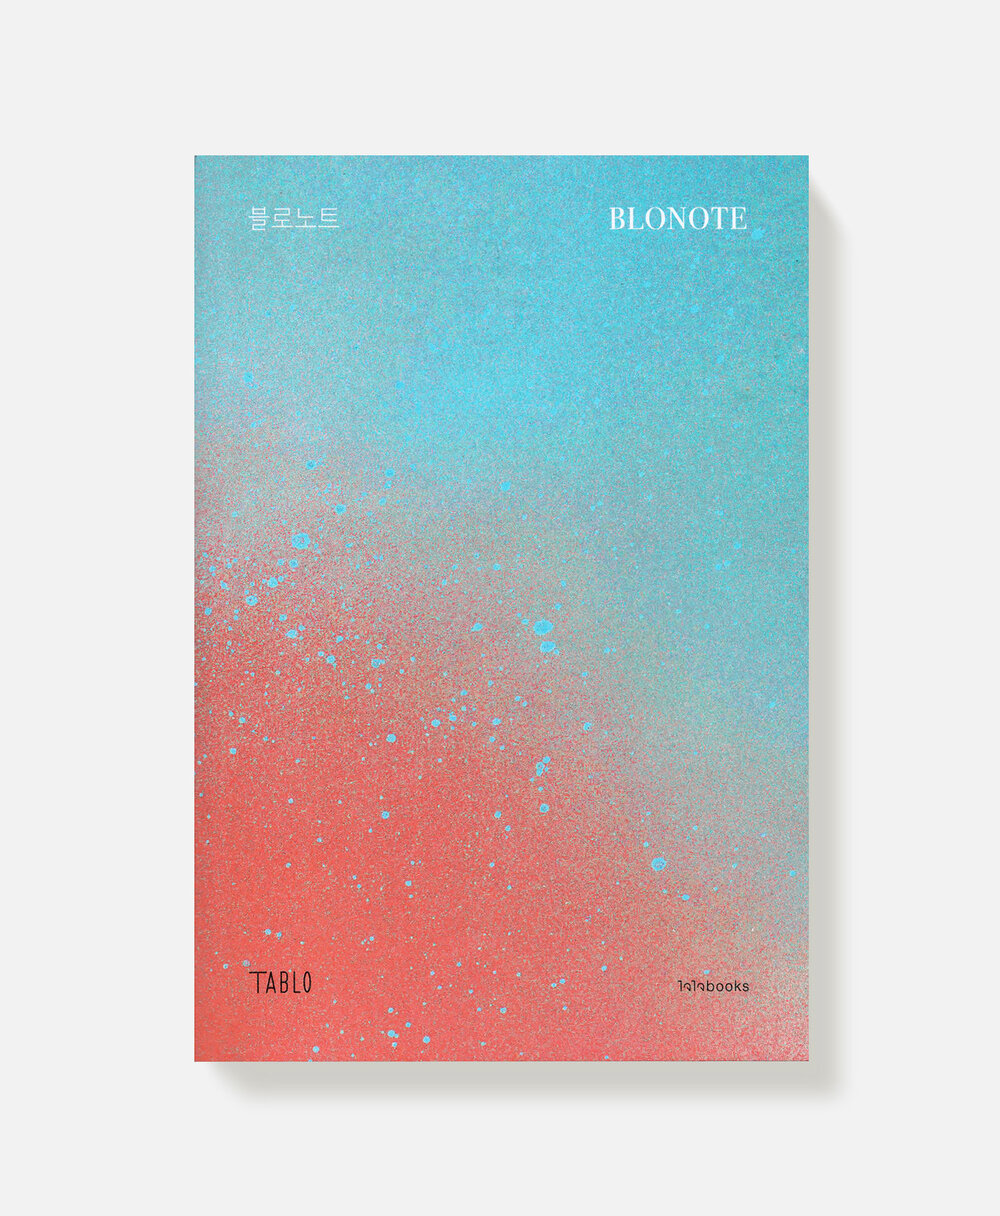 blonote_book_front_l.jpg